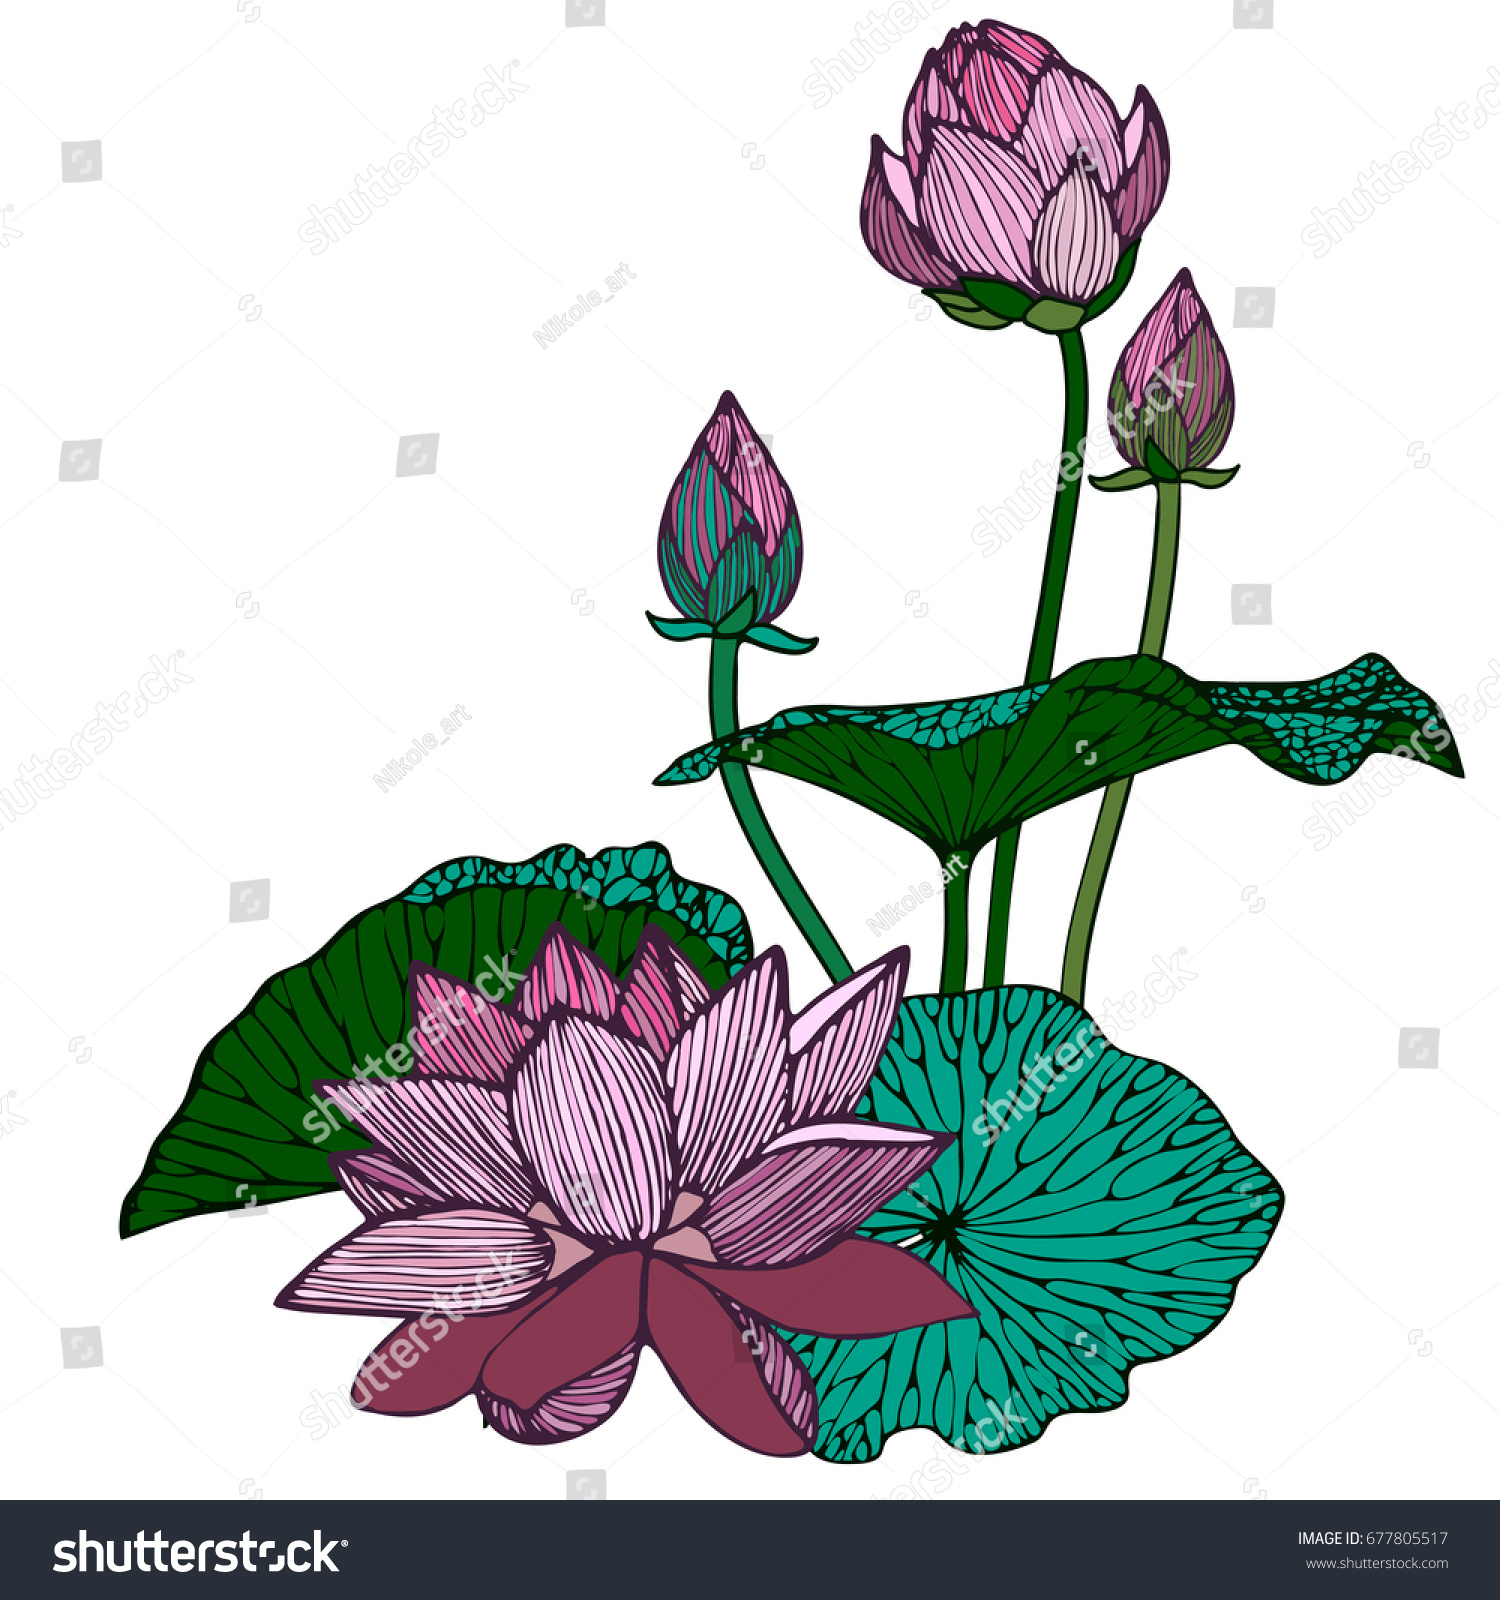 Lotus Flower Bud Green Leaf Graphic Stock Vector HD (Royalty Free ...